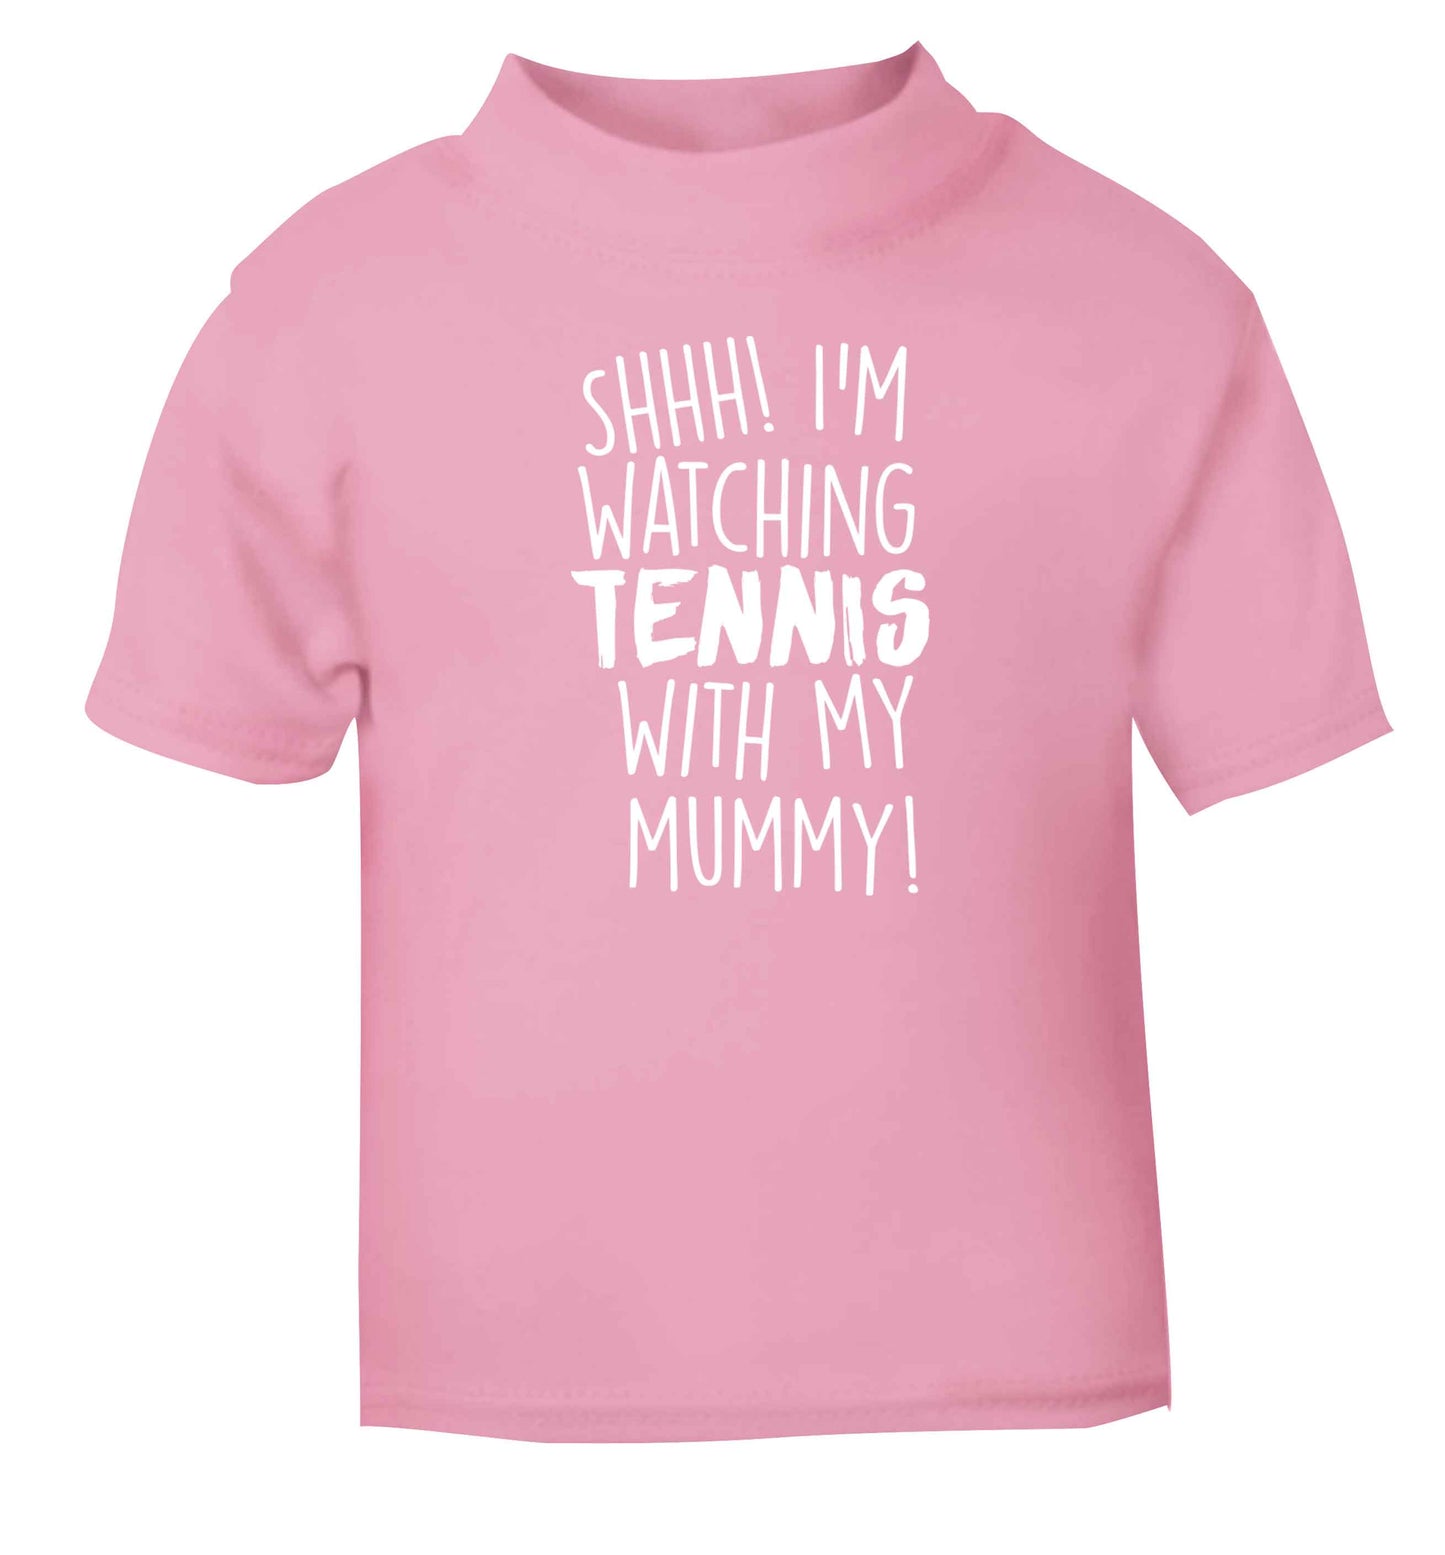 Shh! I'm watching tennis with my mummy! light pink Baby Toddler Tshirt 2 Years